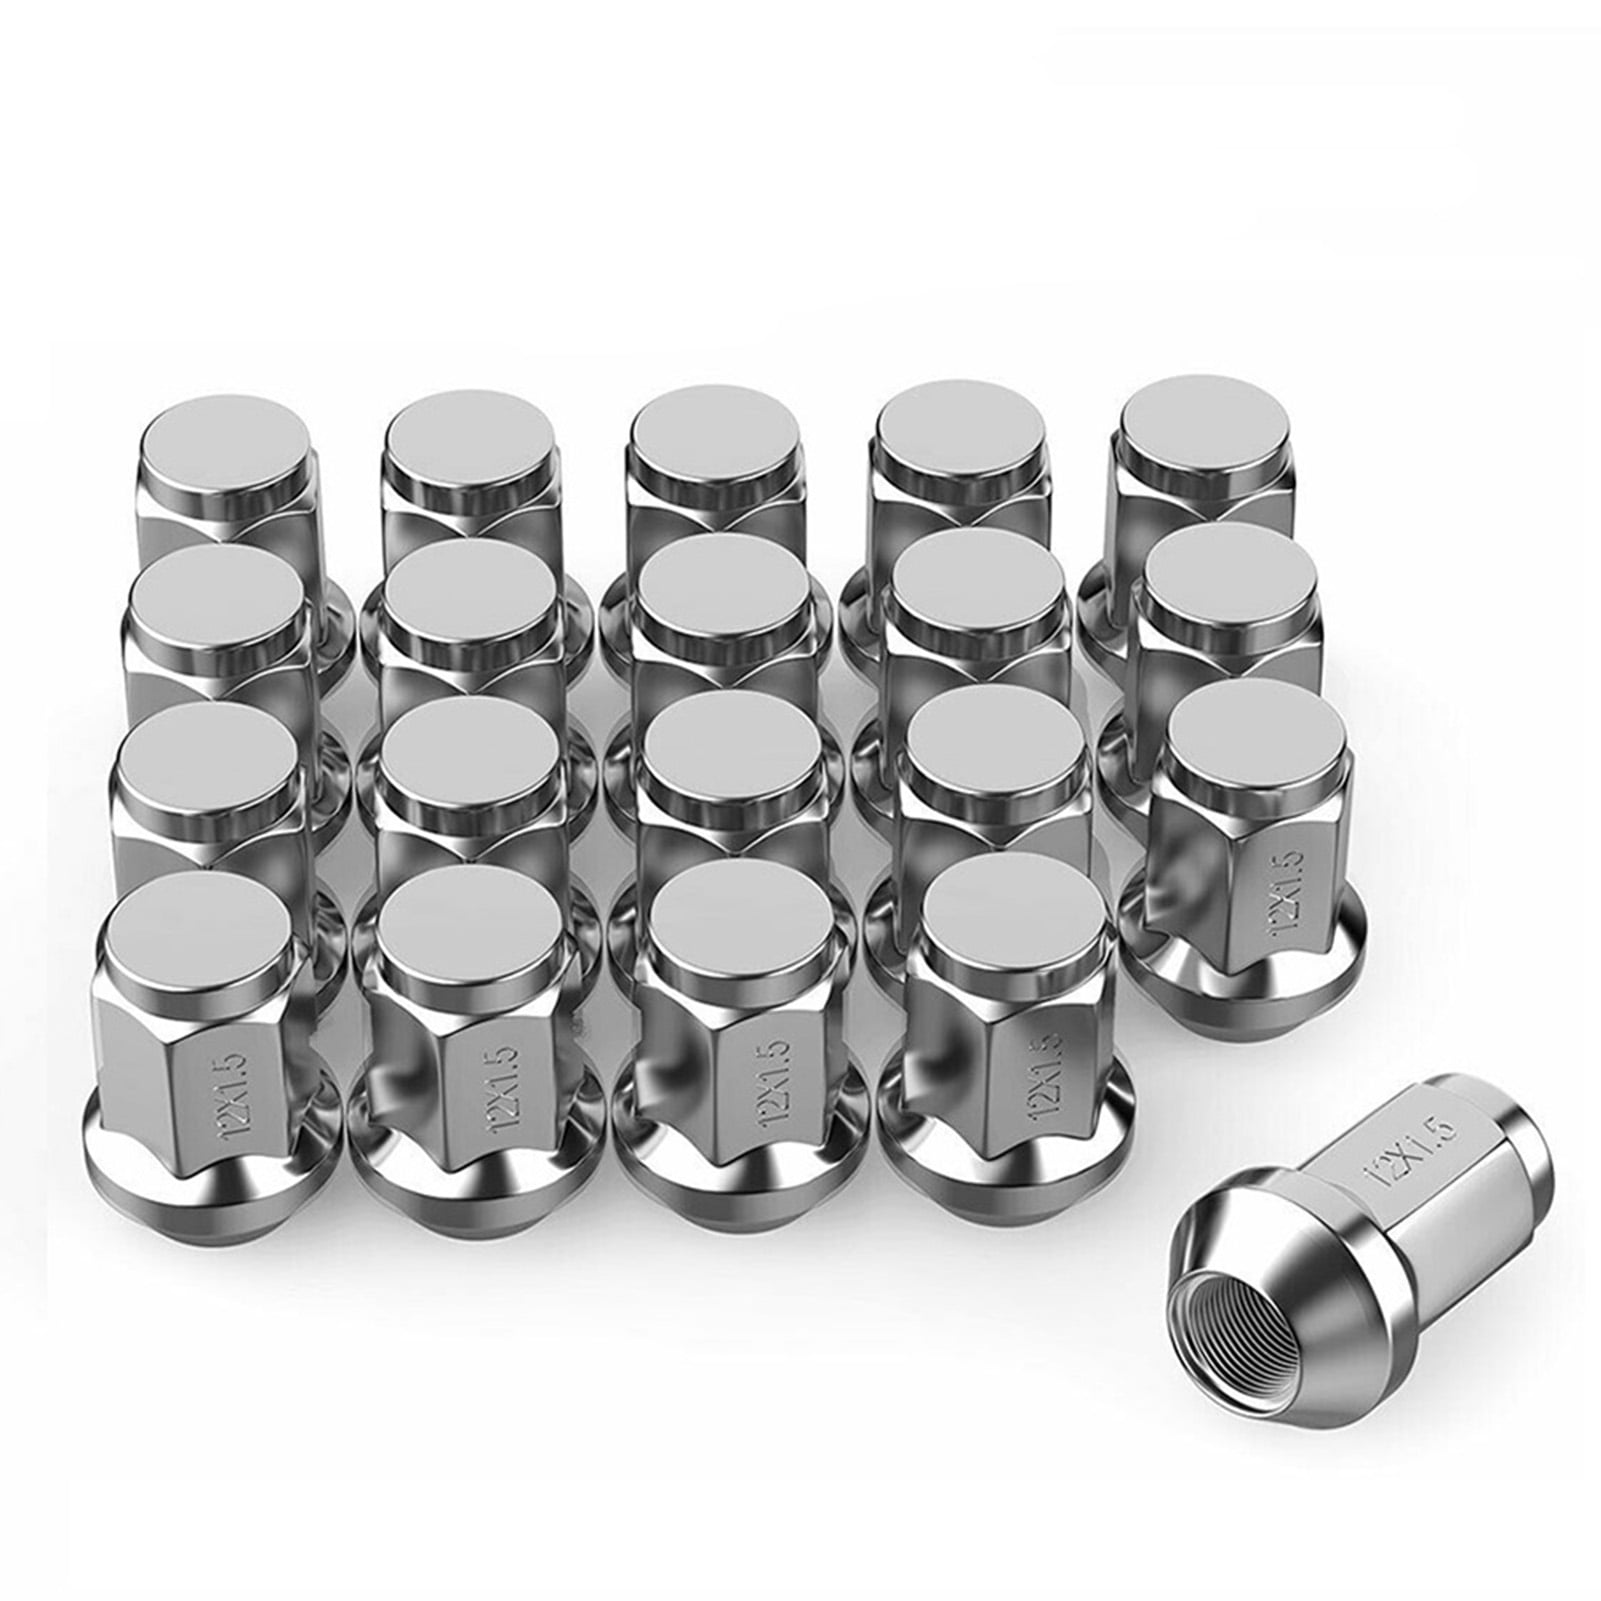 BOLT LUG 11 STUD 16 X ALLOY WHEEL NUTS OPEN ENDED FORD 1/2" UNF 19MM HEX 